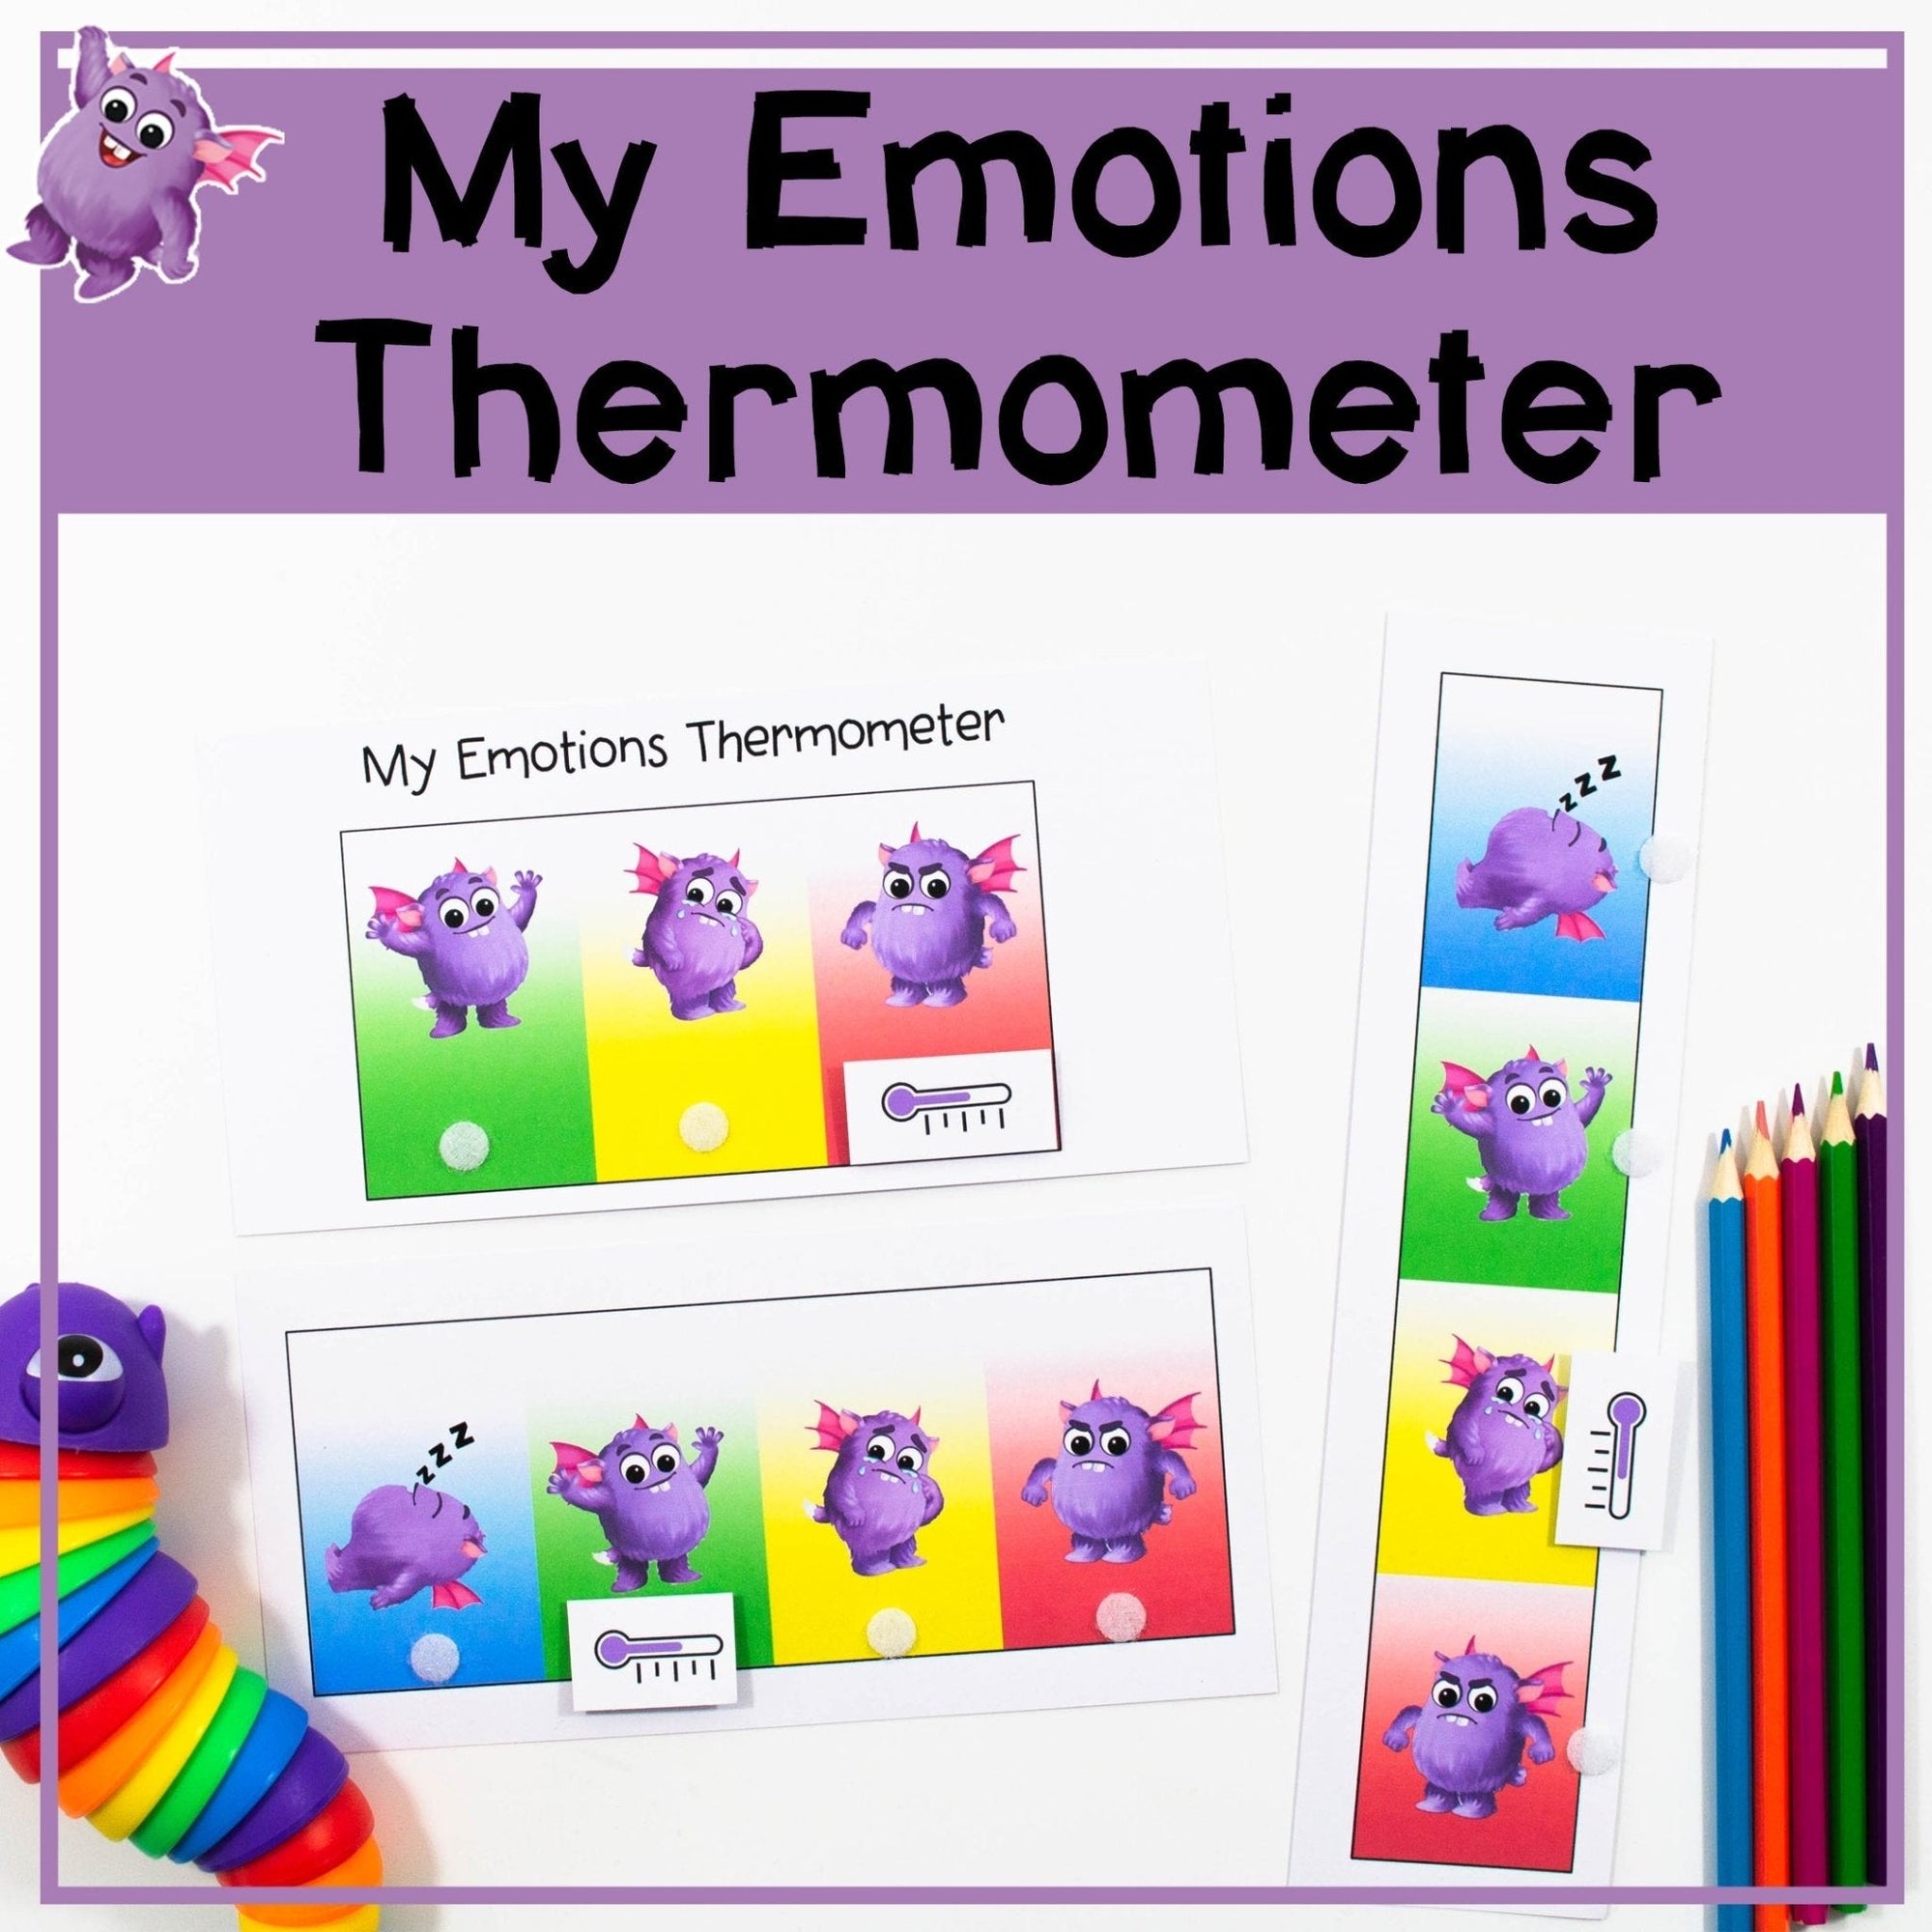 My Emotions Thermometer - Your Teacher's Pet Creature